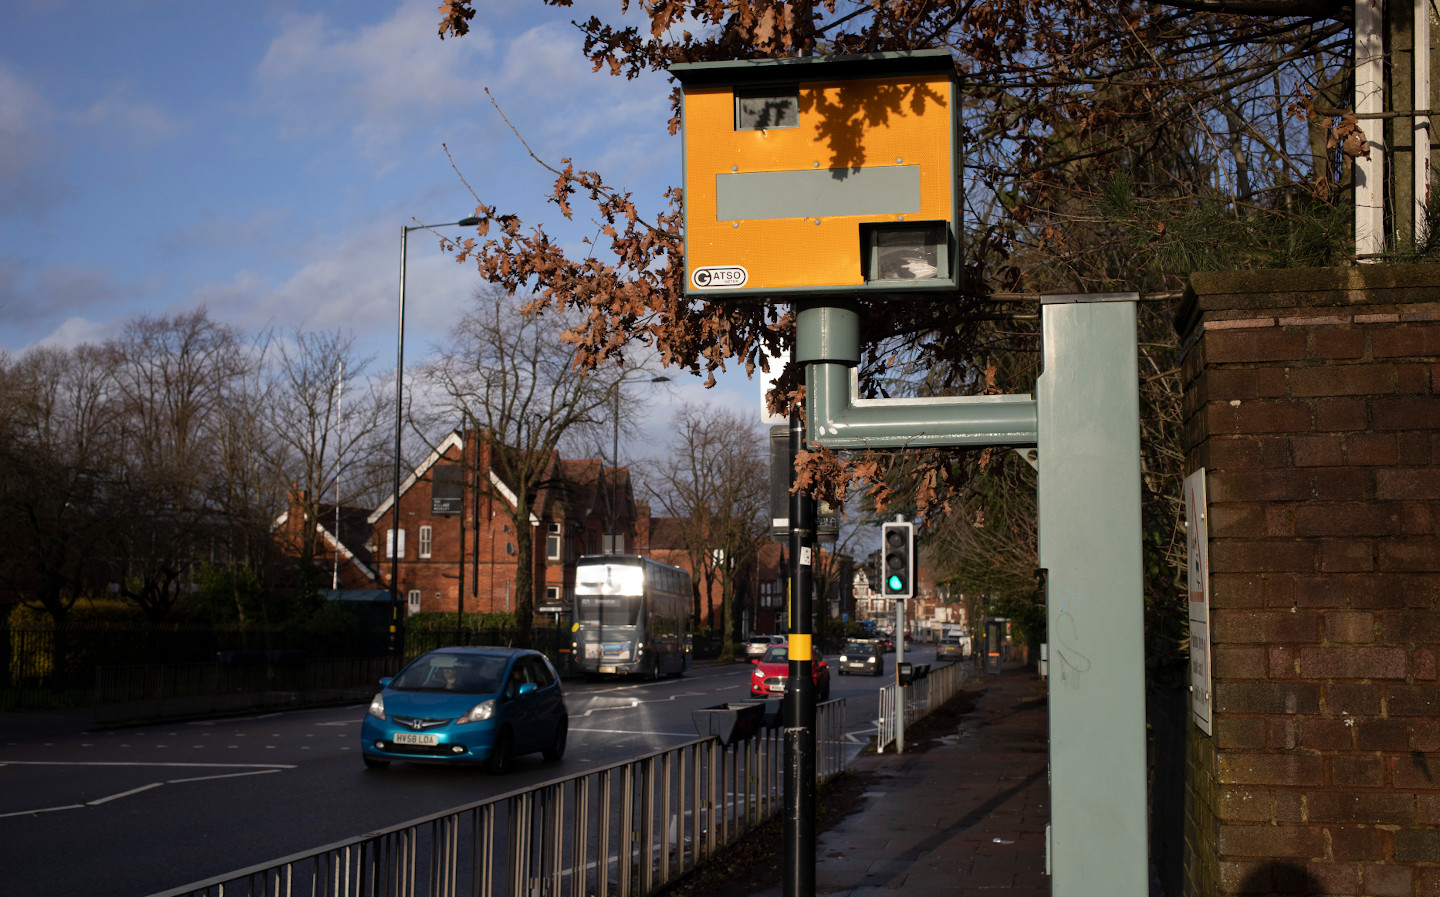 Speed cameras used for revenue, watchdog finds